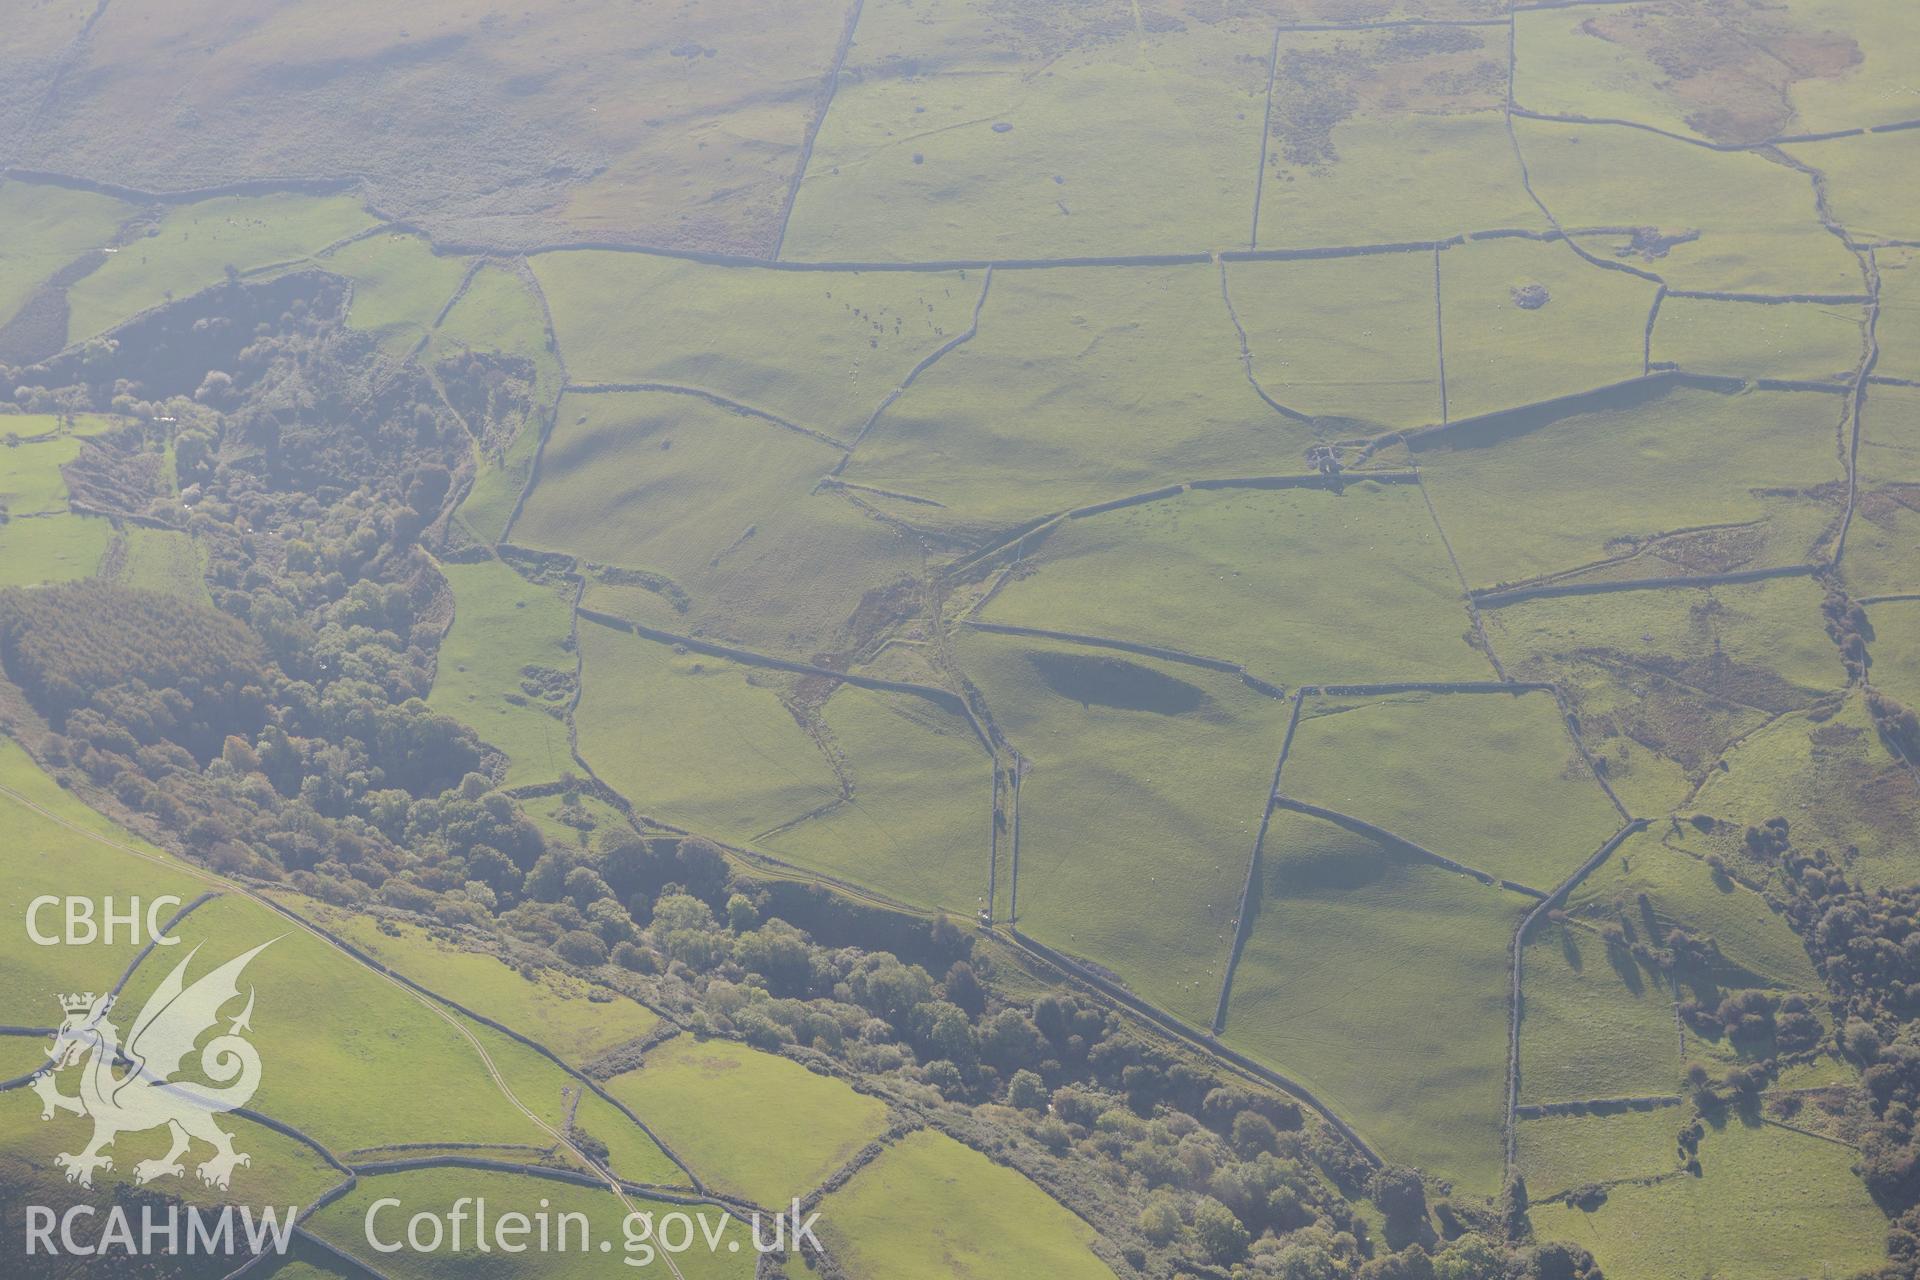 Prehistoric (and later) field system and cultivation terraces at Rhiwgaeron farm, Llwyngwril. Oblique aerial photograph taken during the Royal Commission's programme of archaeological aerial reconnaissance by Toby Driver on 2nd October 2015.